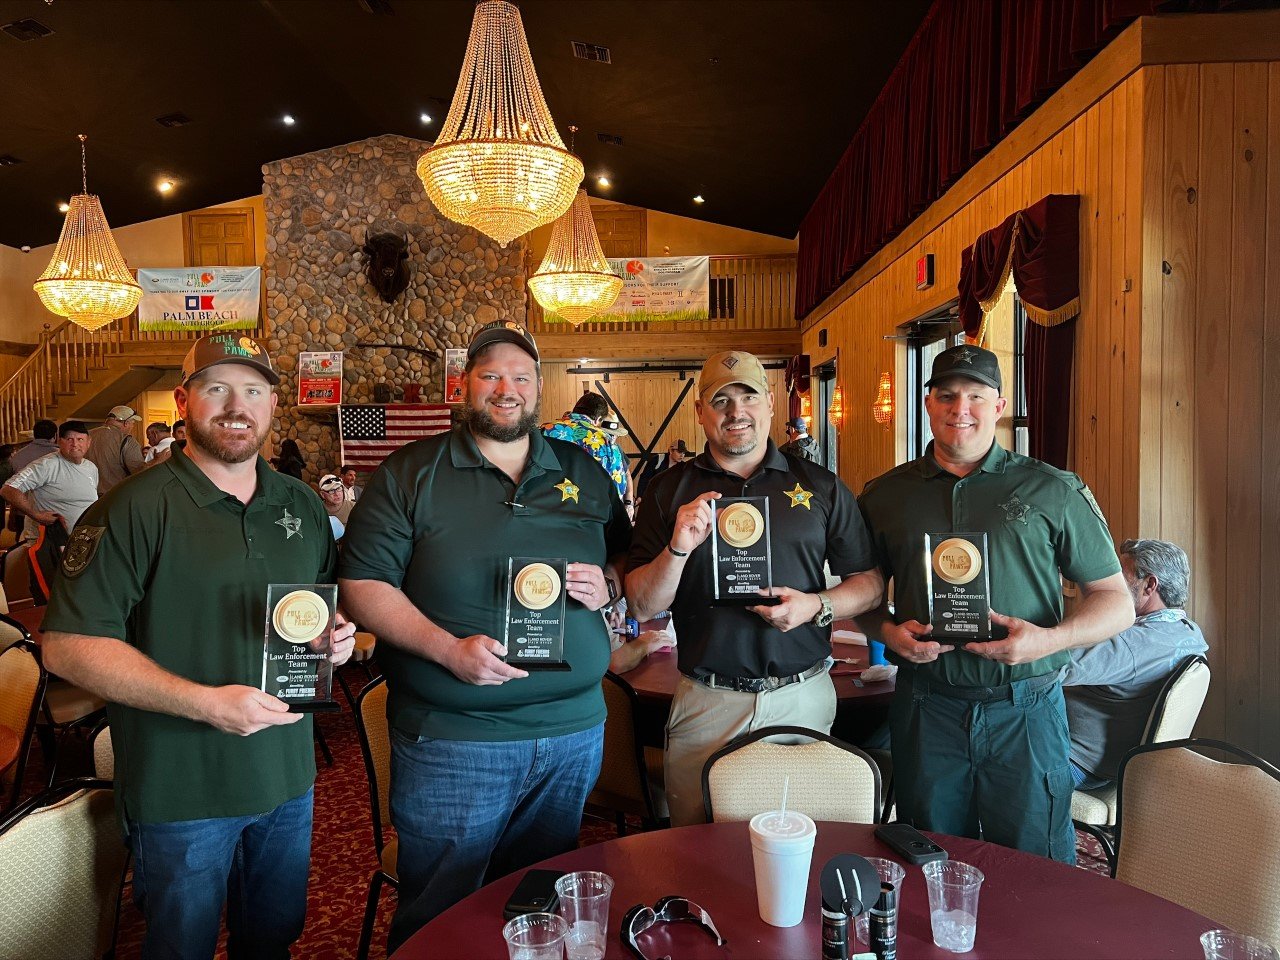 OKEECHOBEE -- Bringing home trophies from the Pull for Paws  event at OK Corral were David Rogers, Ryane Ammons, Jack Nash and Randy Thomas. Thomas was one point away from the top gun with a 94 out of 100 on a challenging windy day.